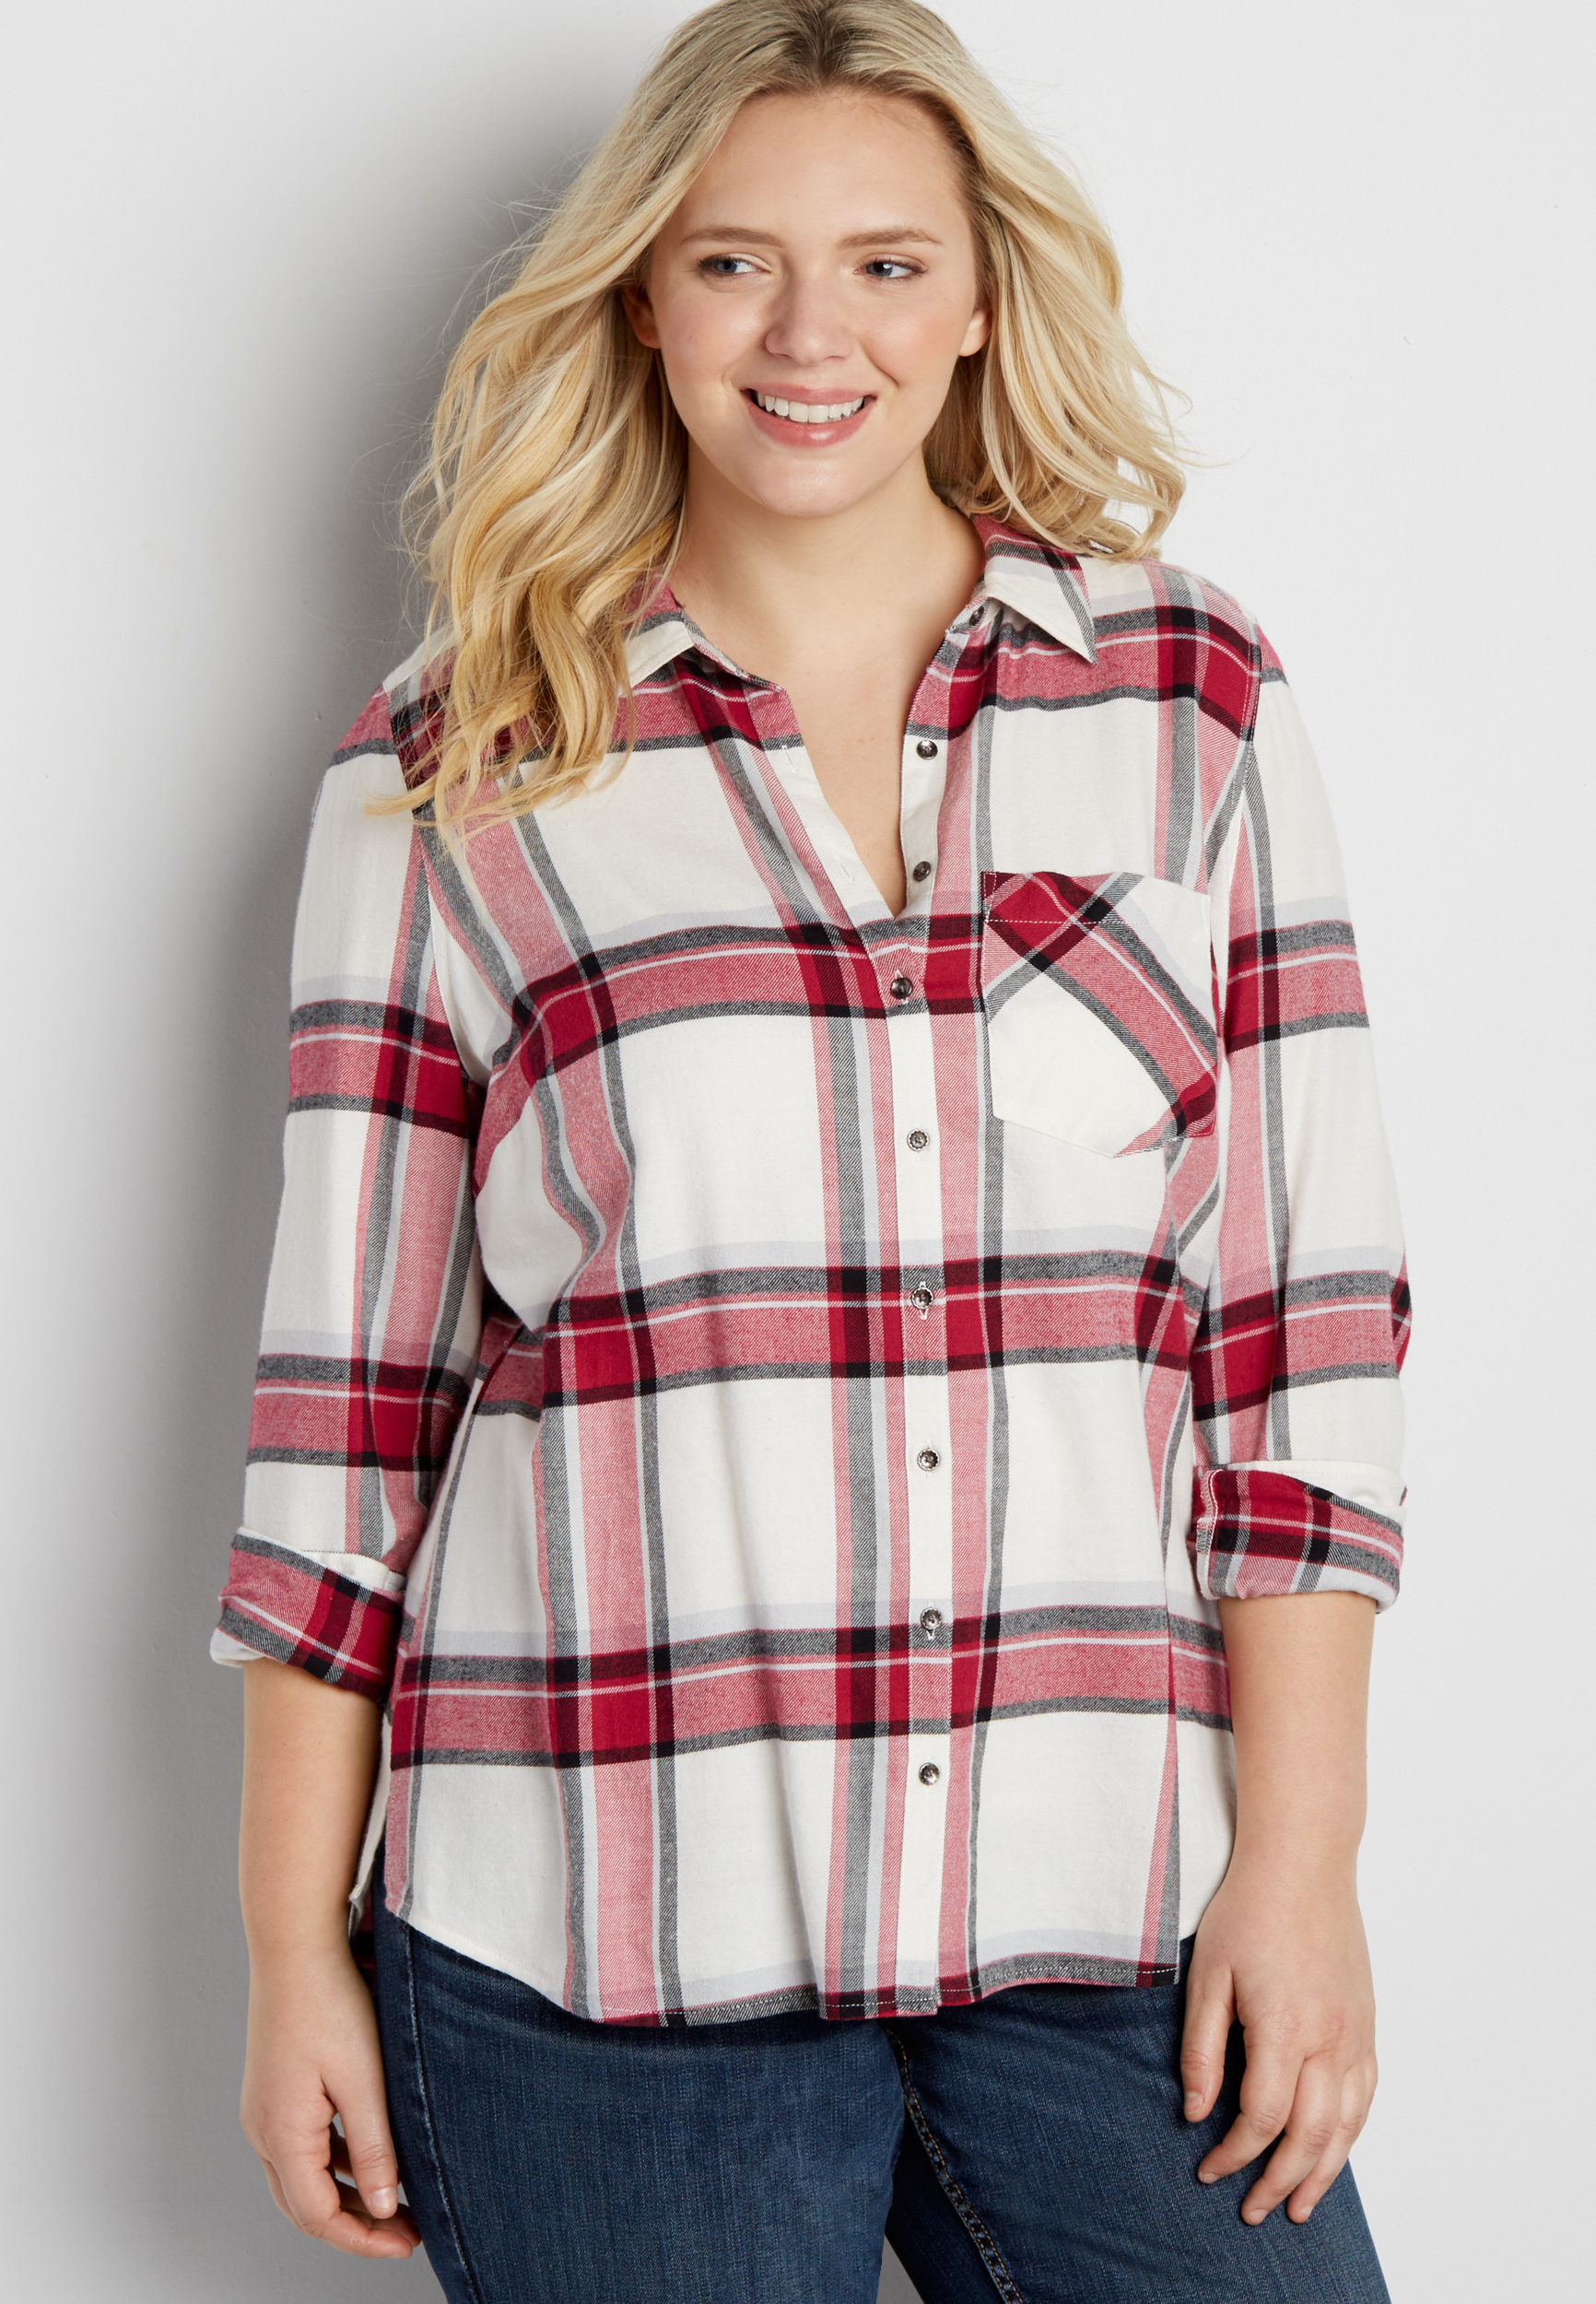 neon pink plus size shirt OFF53%